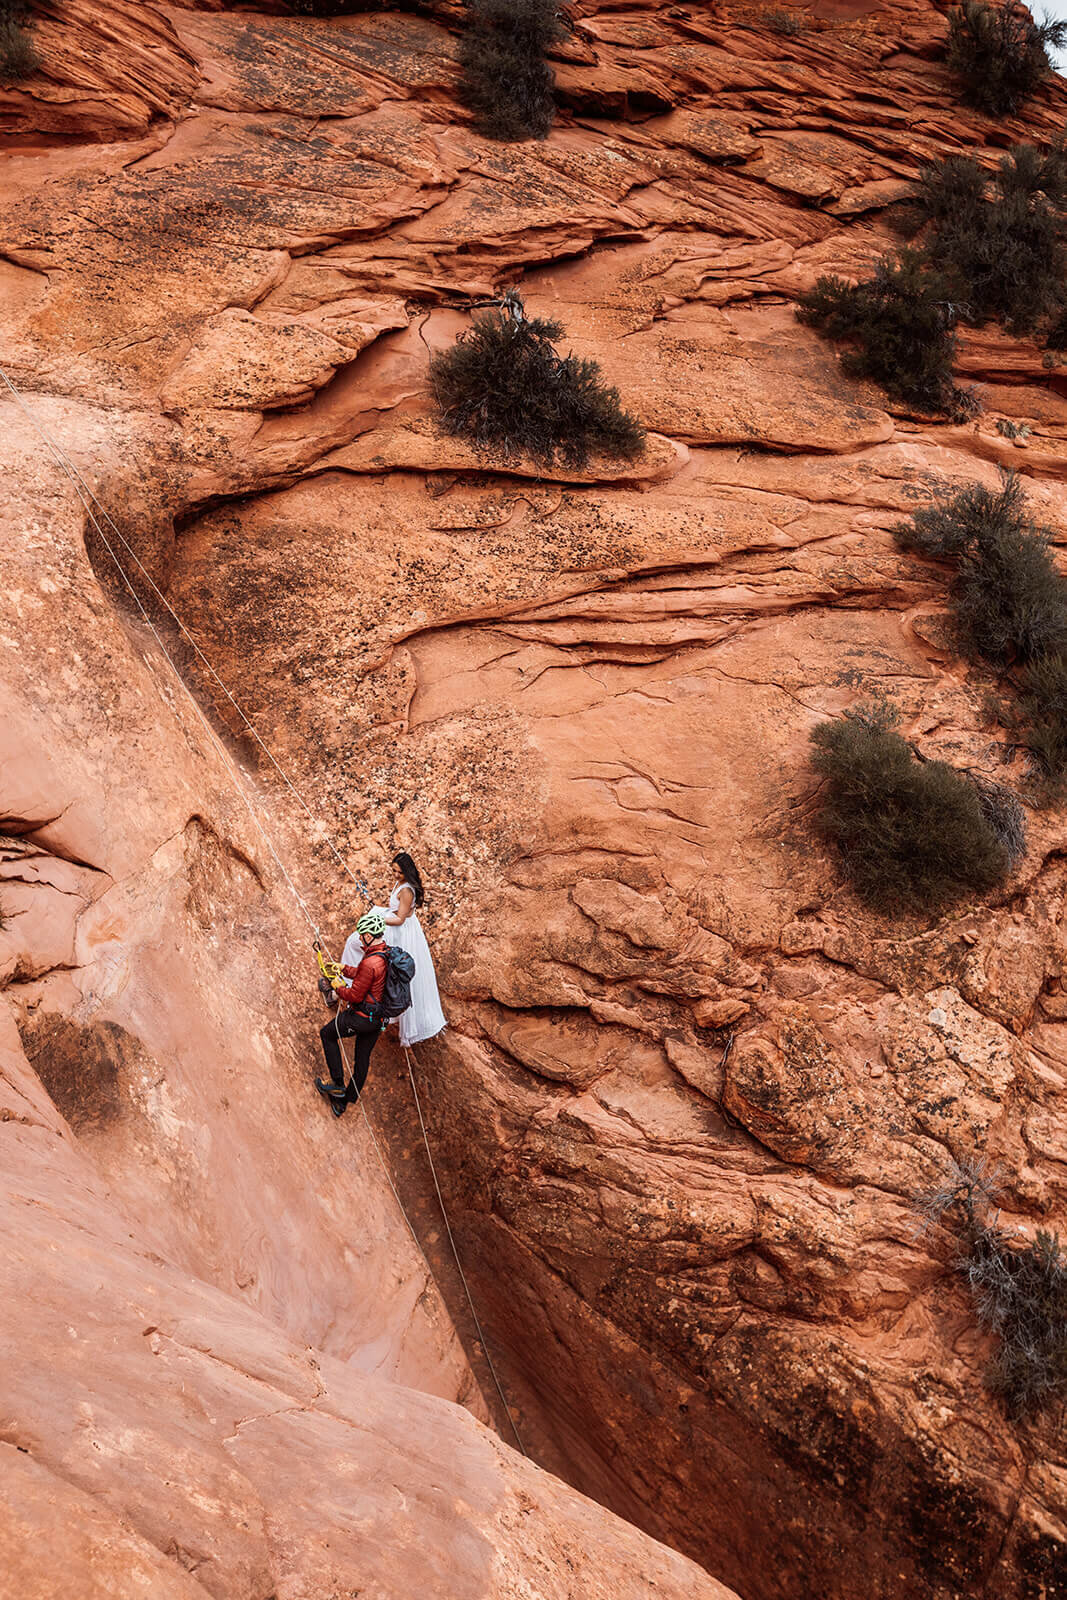  Man proposes to woman on rappel in a technical canyon outside of Zion National Park. Zion National Park elopement photographer 